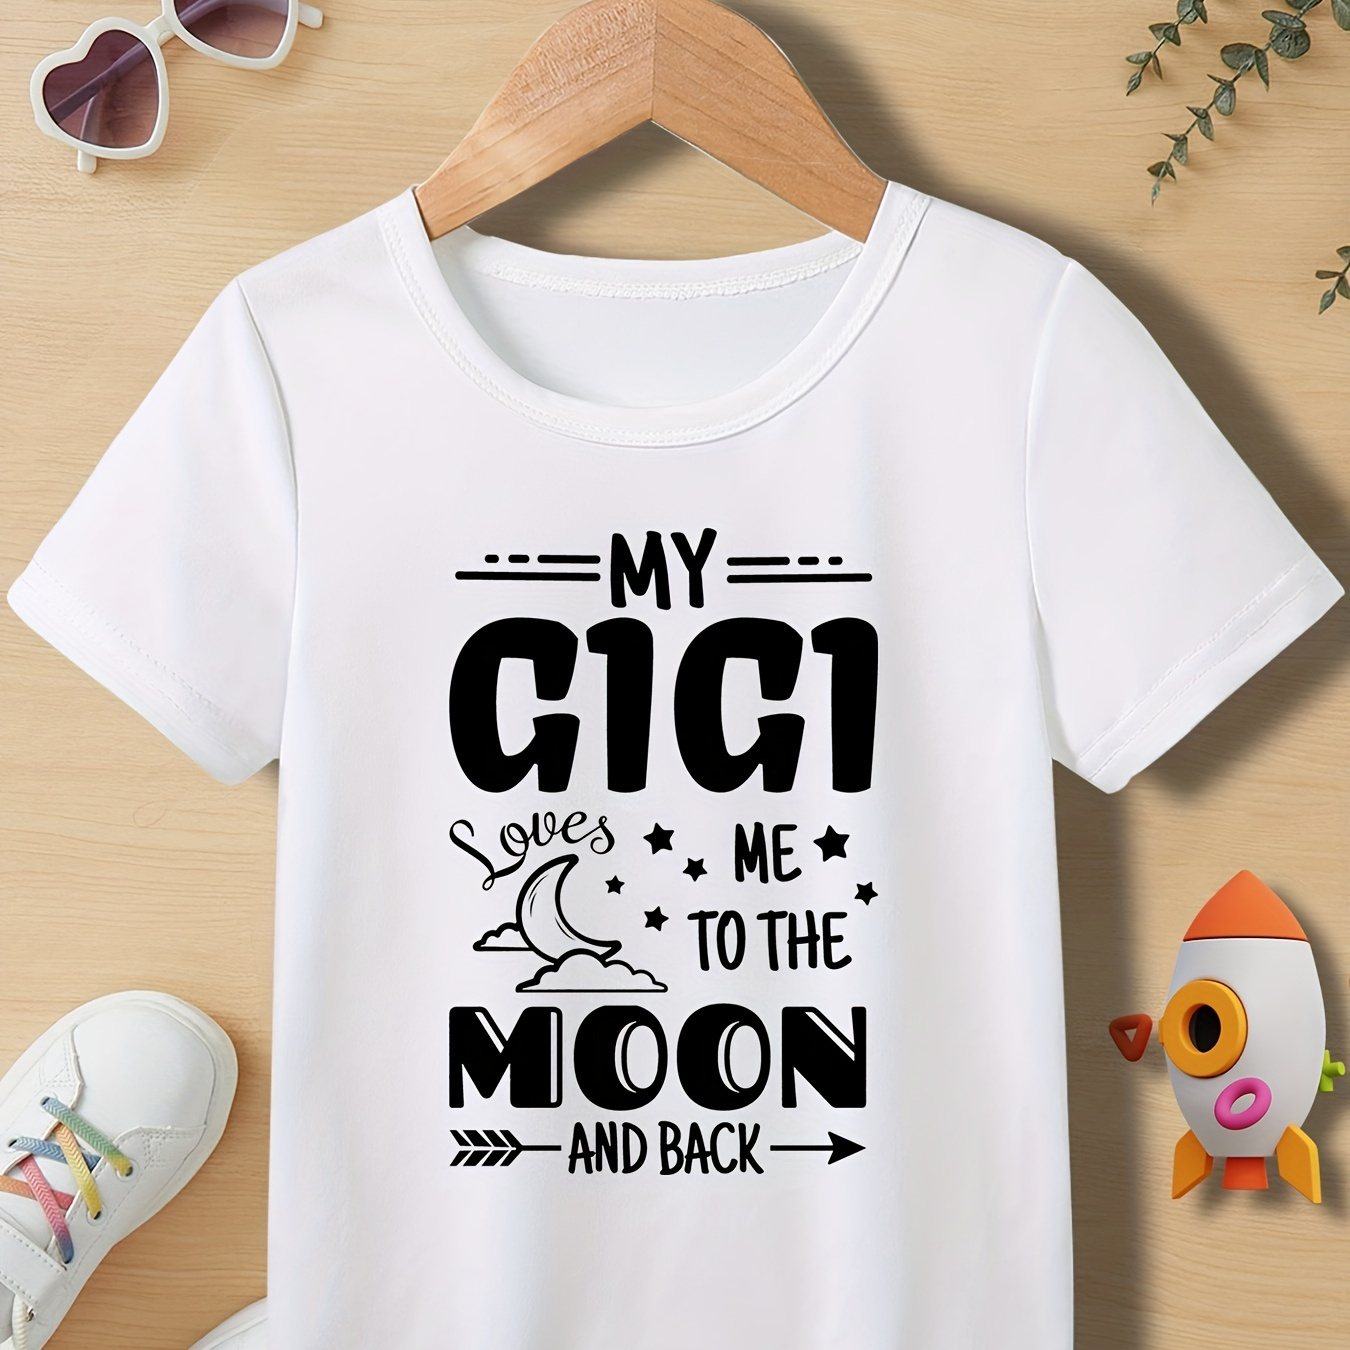 

My Gigi Loves Me To The Moon And Back Letter Print Boys Creative T-shirt, Casual Lightweight Comfy Short Sleeve Tee Tops, Kids Clothings For Summer